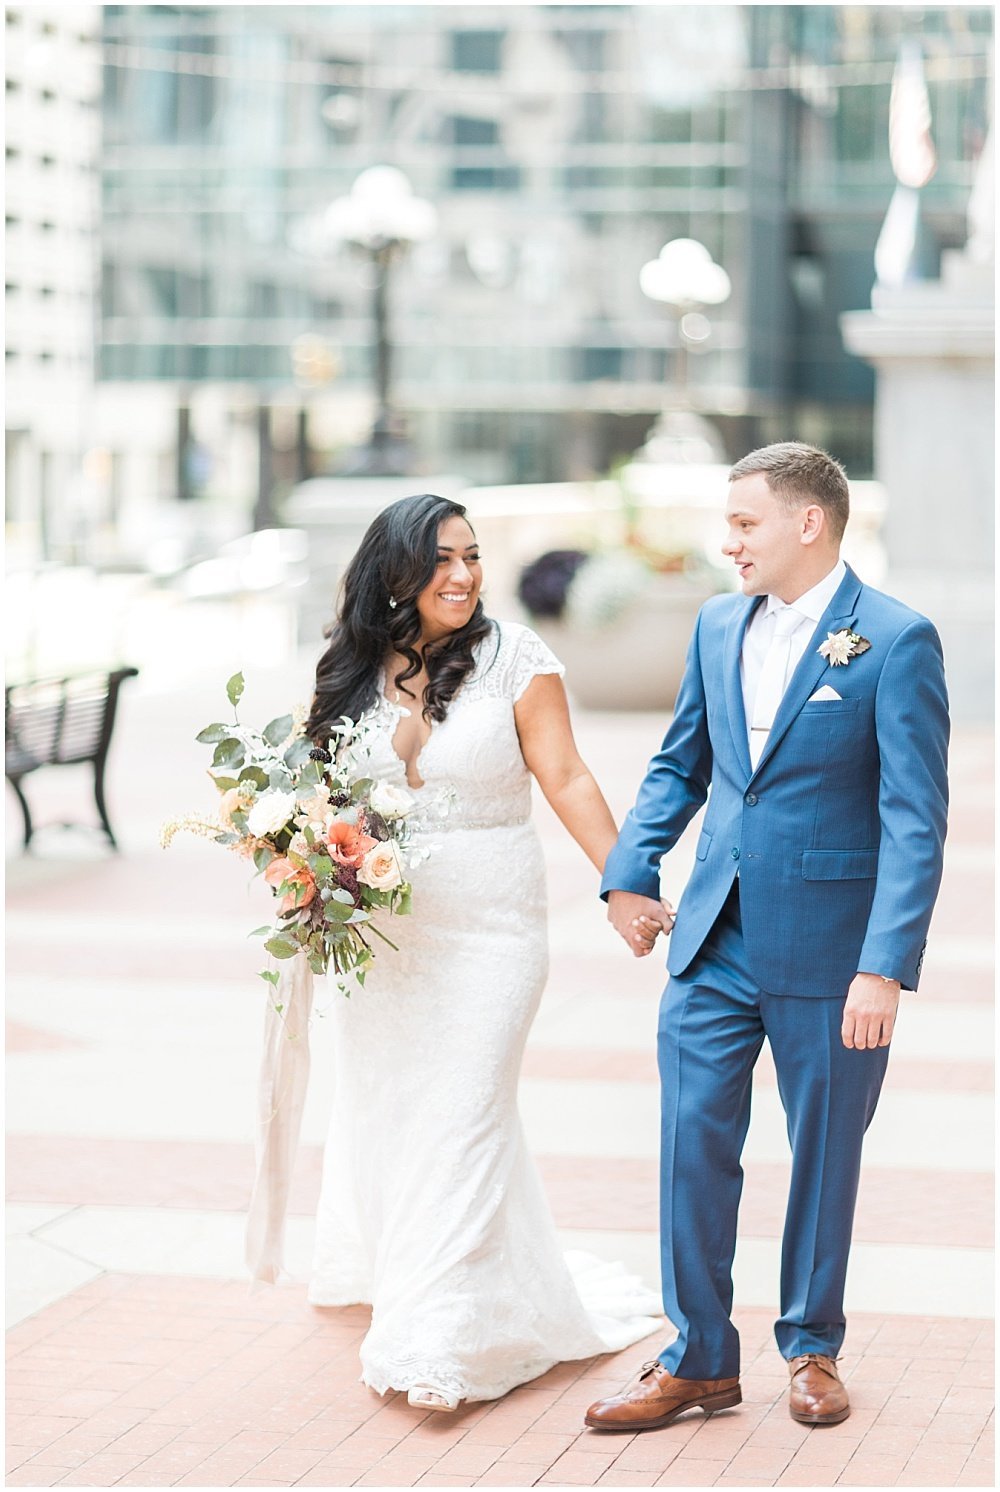 Summer-Mexican-Inspired-Gold-And-Floral-Crowne-Plaza-Indianapolis-Downtown-Union-Station-Wedding-Cory-Jackie-Wedding-Photographers-Jessica-Dum-Wedding-Coordination_photo___0020